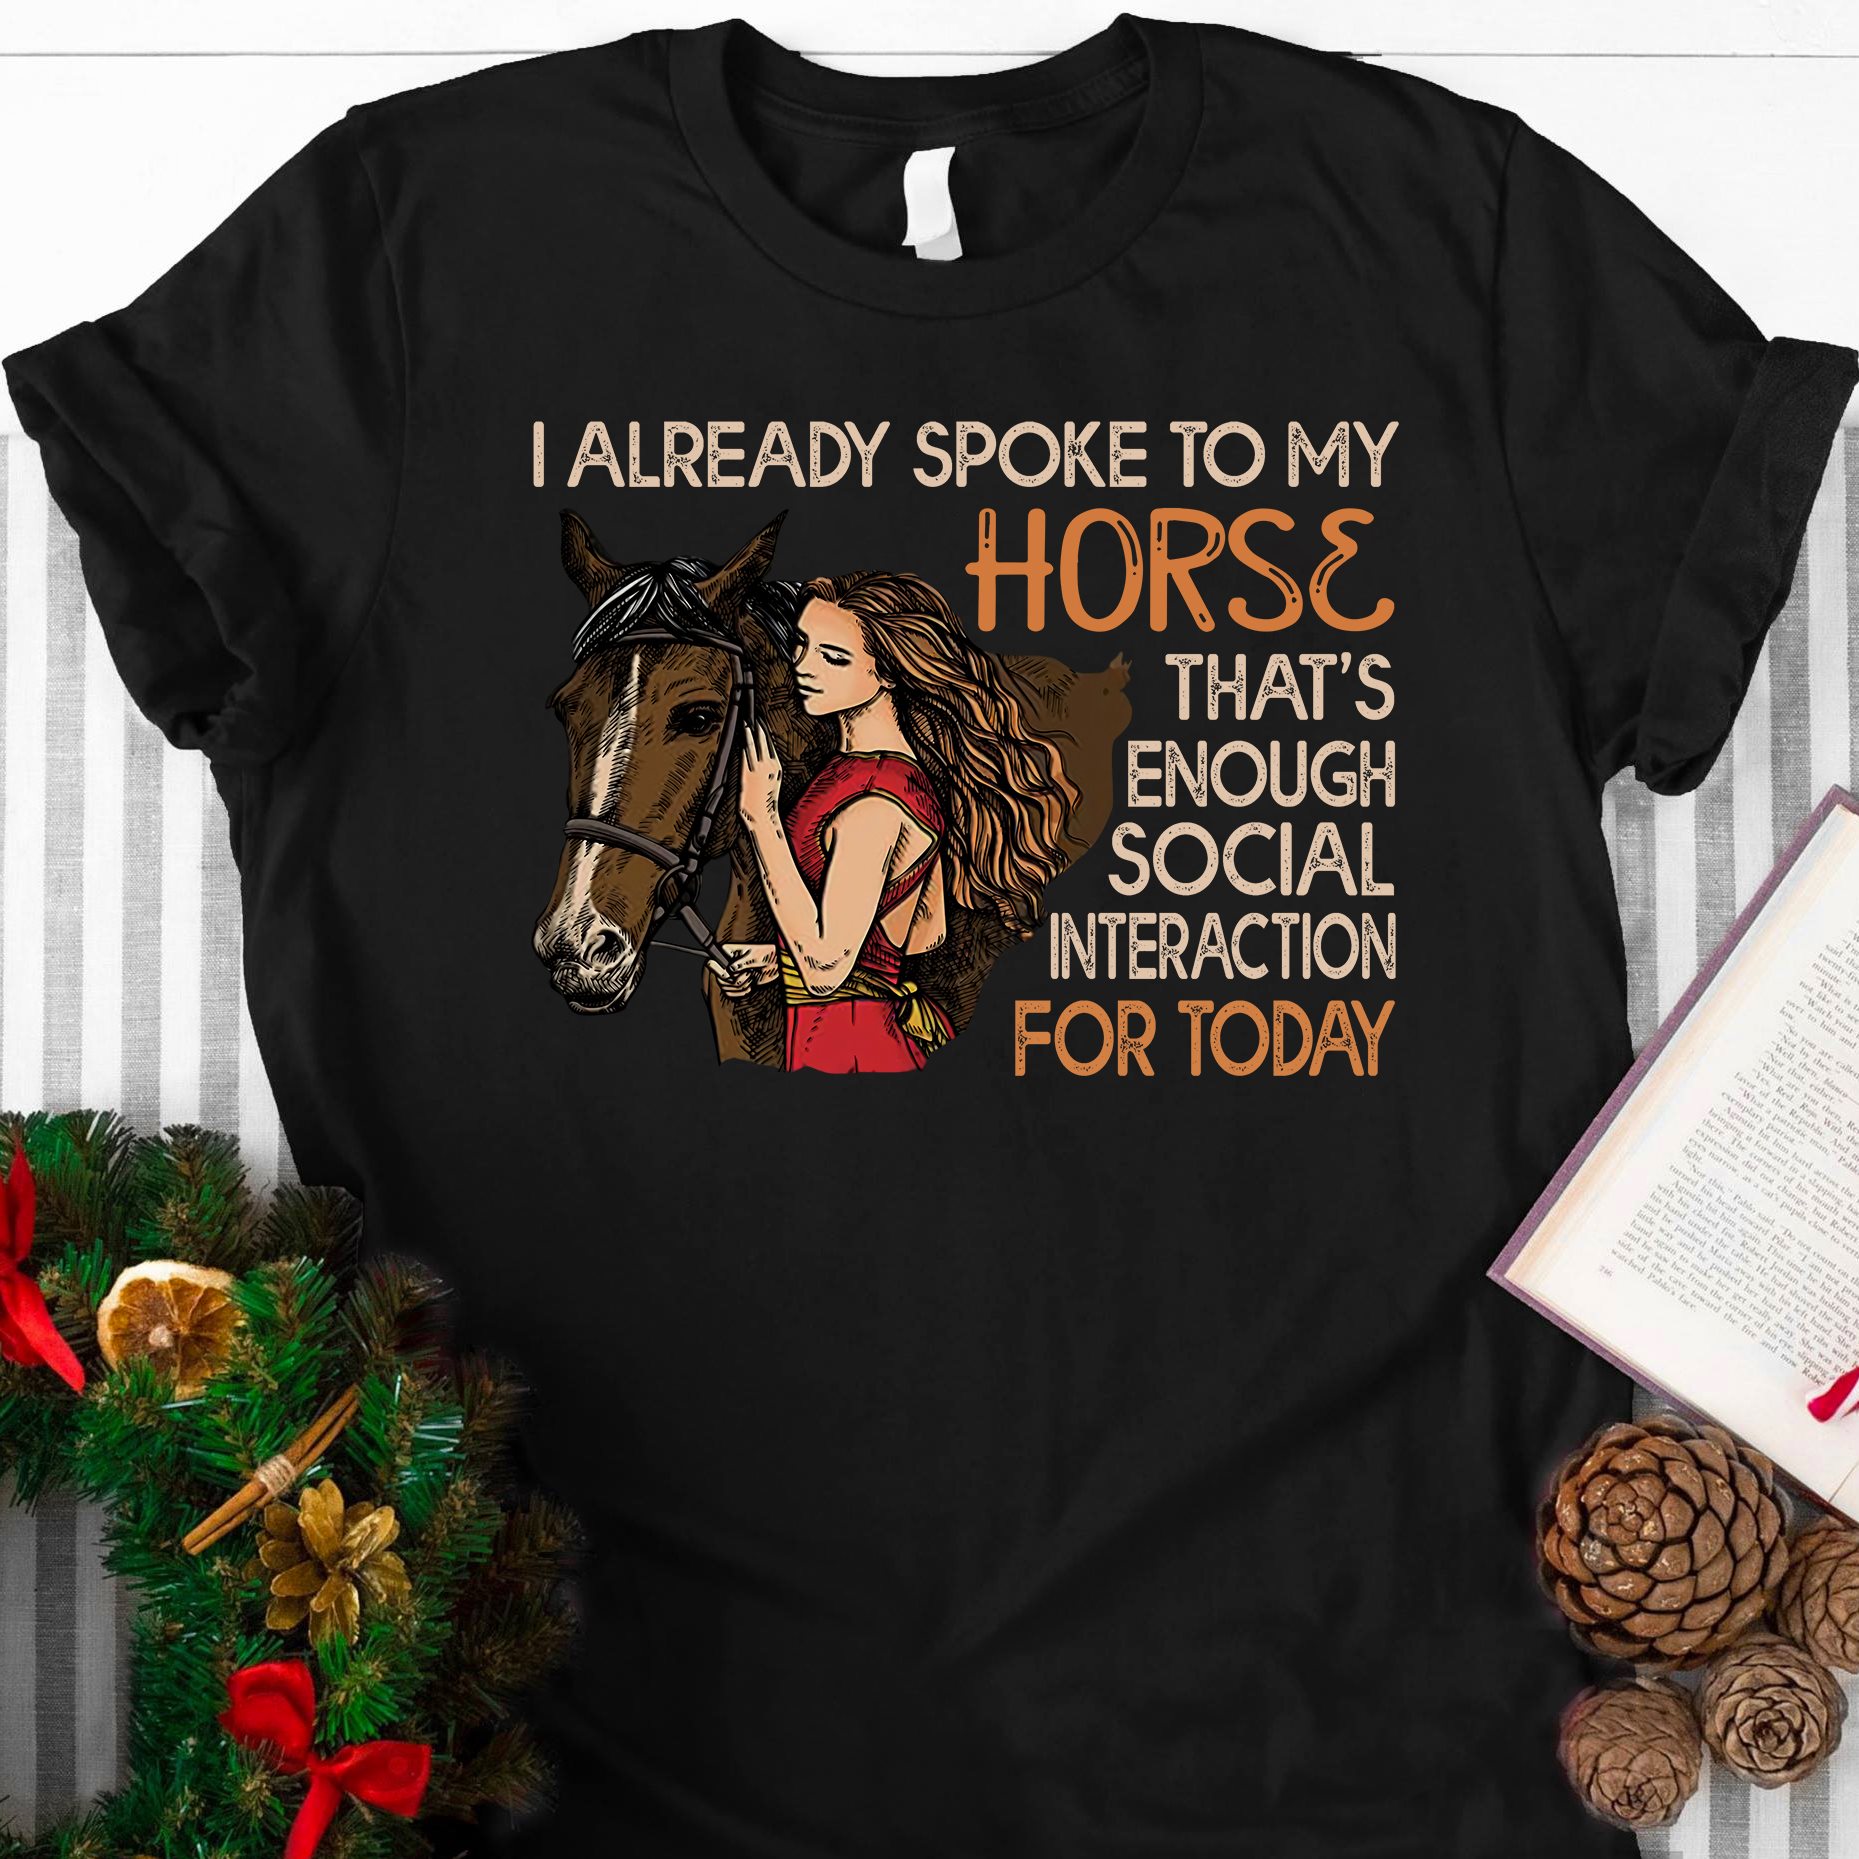 I already spoke to my horse that's enough social interaction for today - Girl loves horse